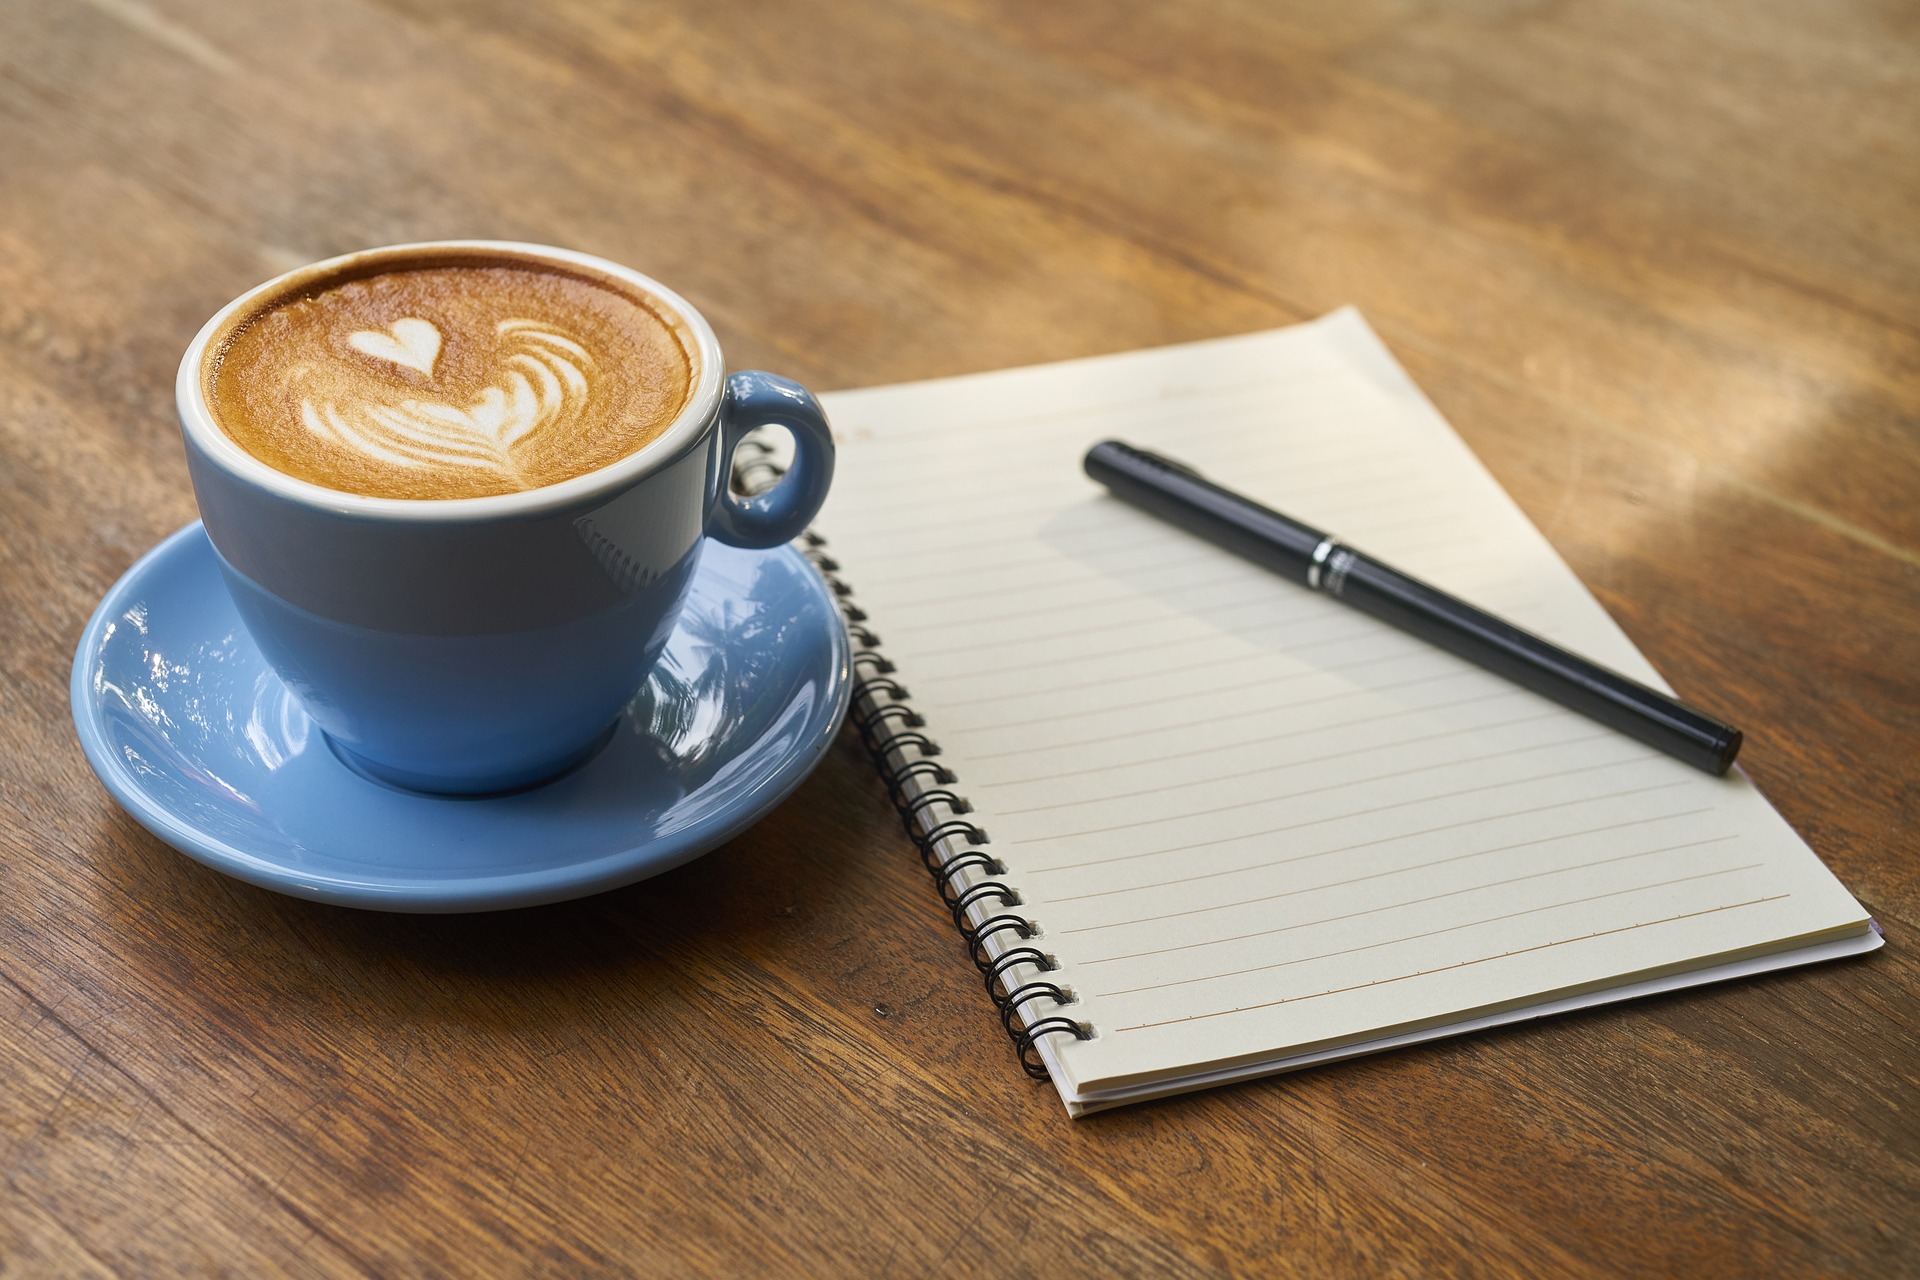 reasons to write: coffee, a blank notebook, and a black pen lie on a wooden table waiting to be enjoyed